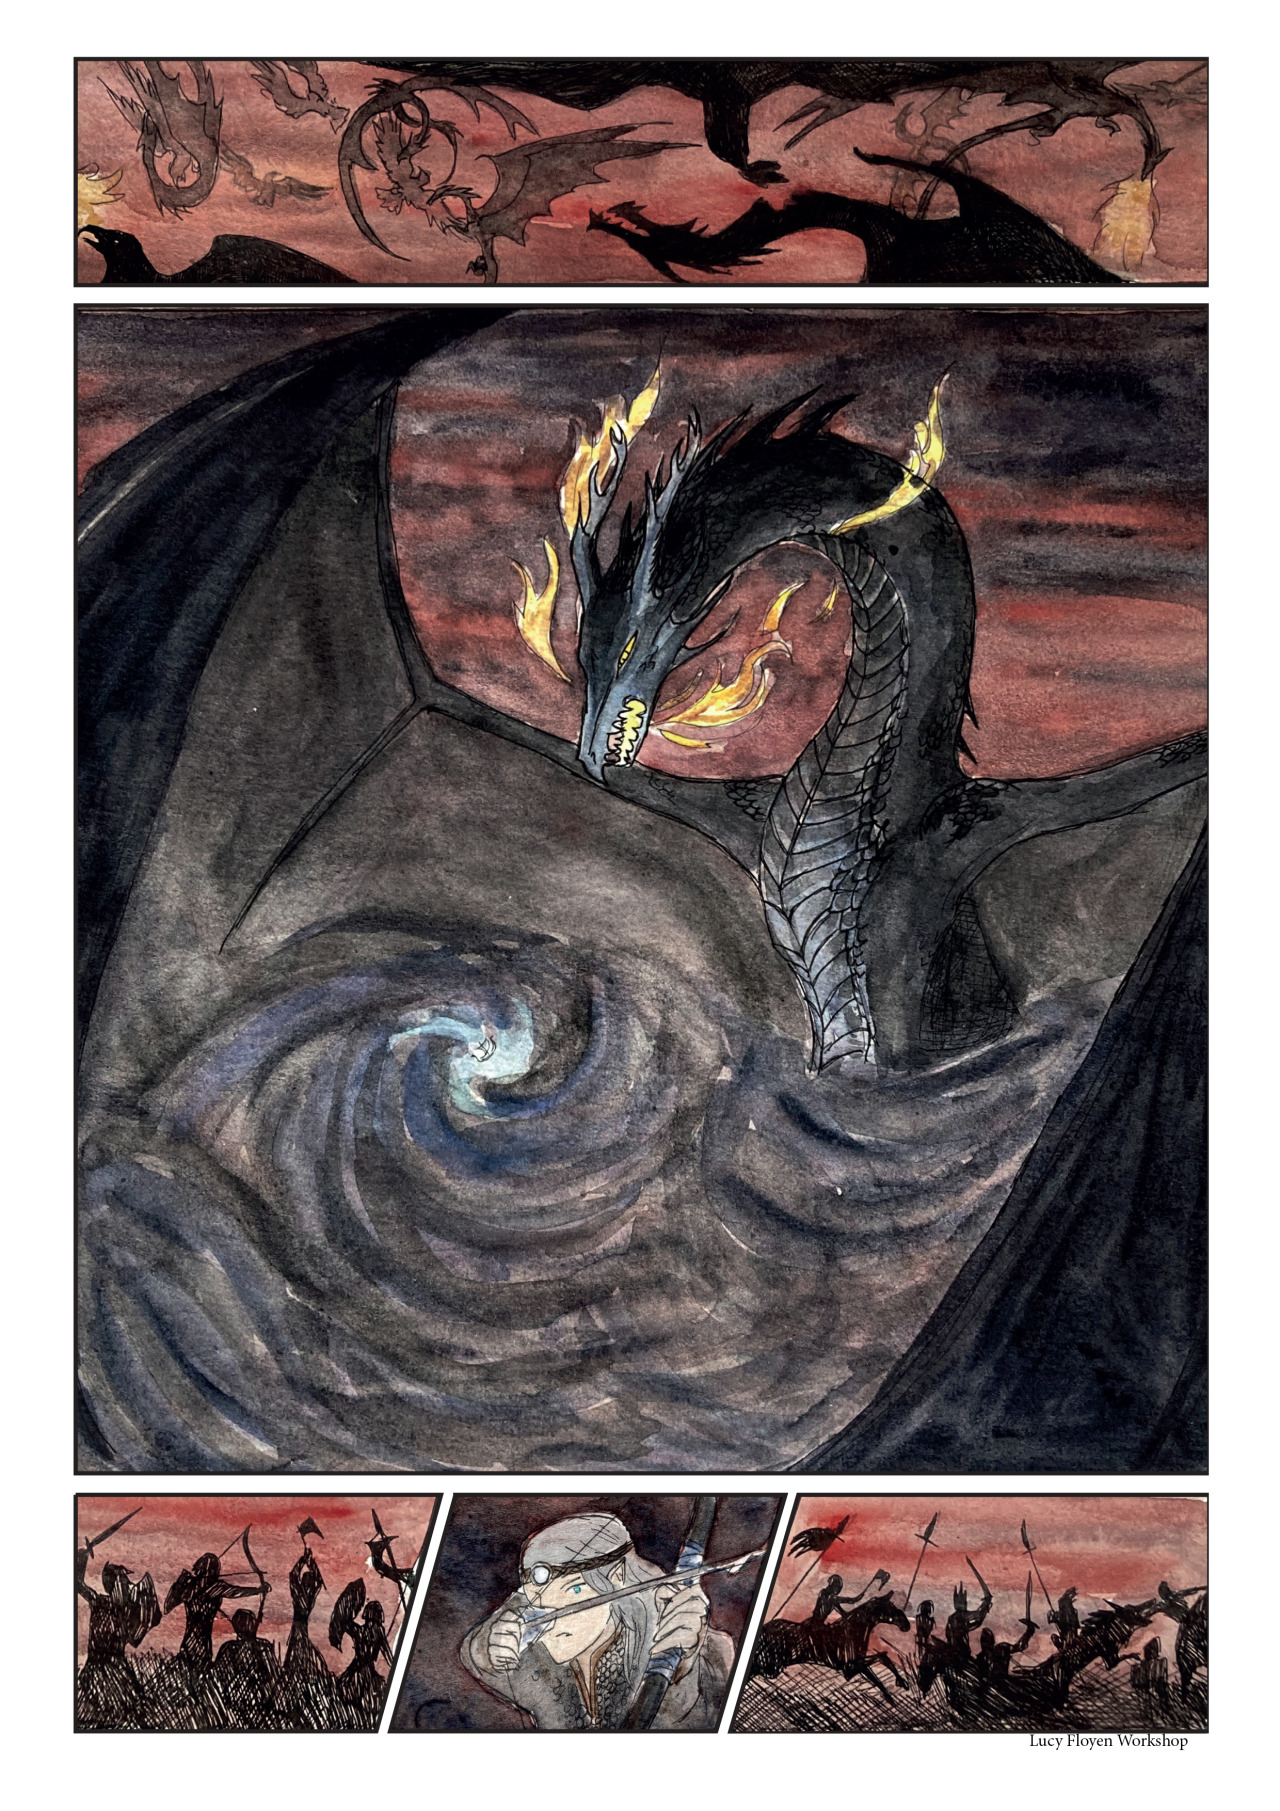 Middle-earth Mysteries - How big was Ancalagon the Black? 